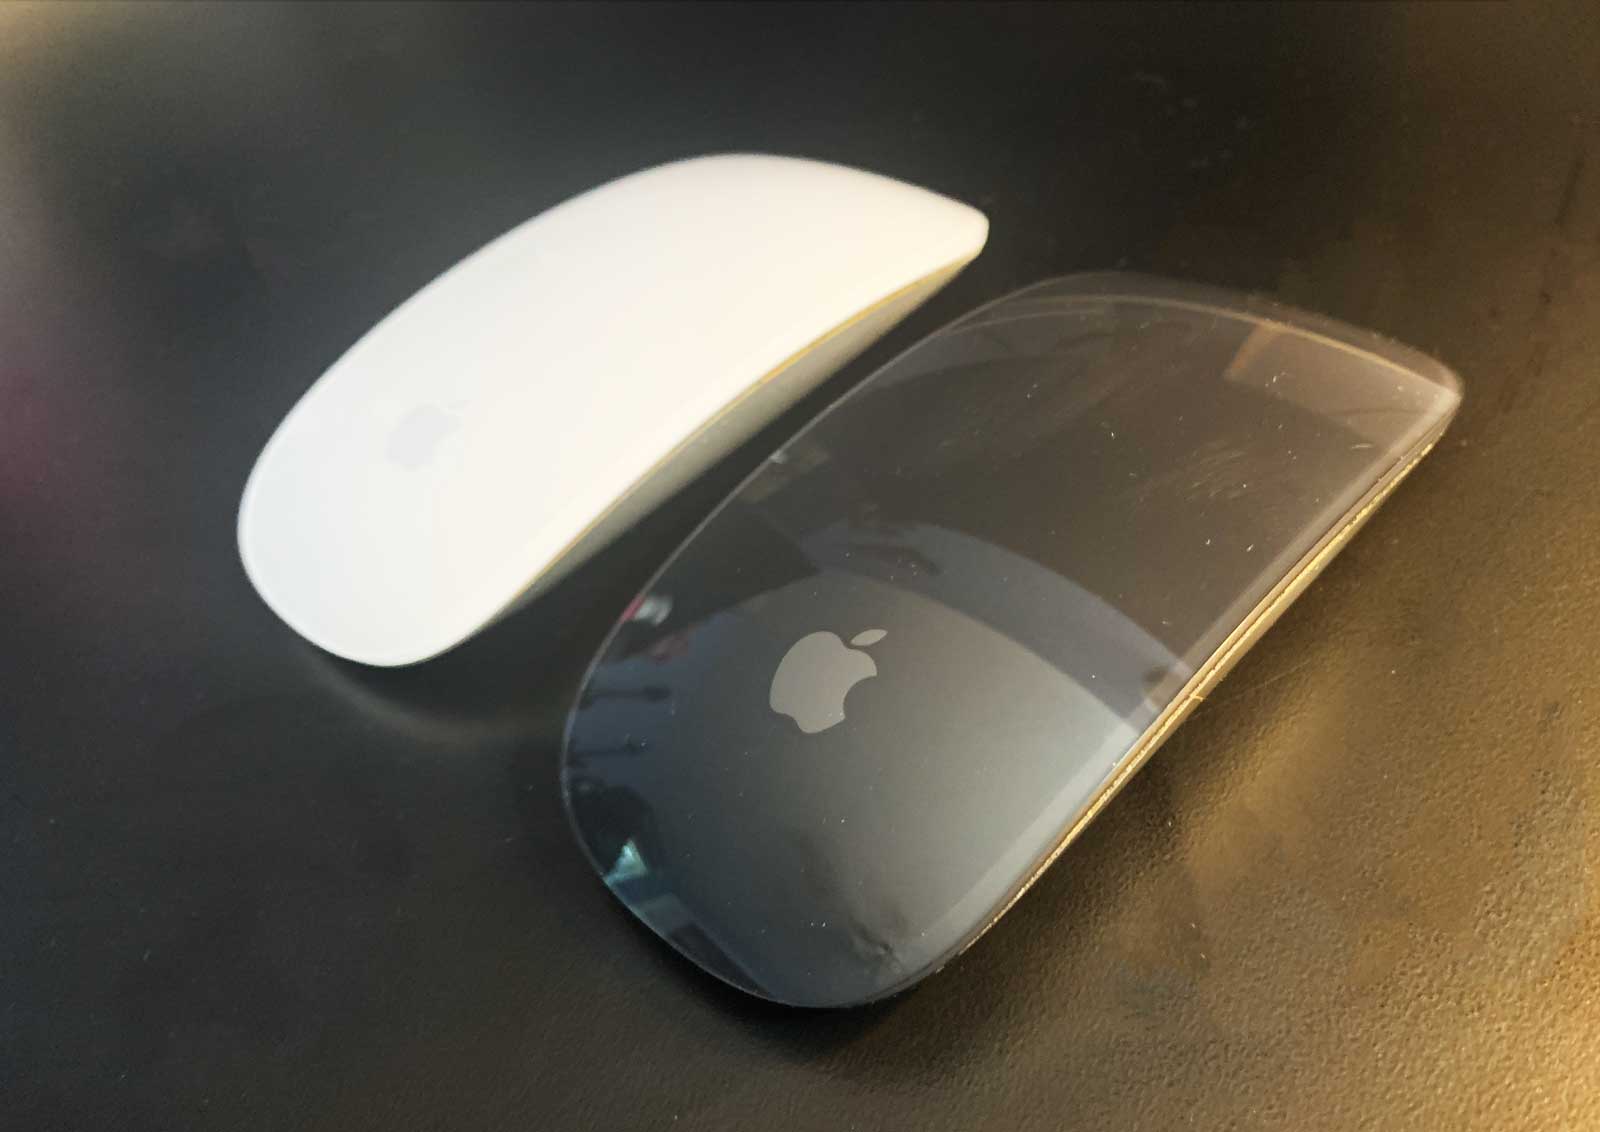 What’s the difference between Apple Magic Mouse 1 and 2